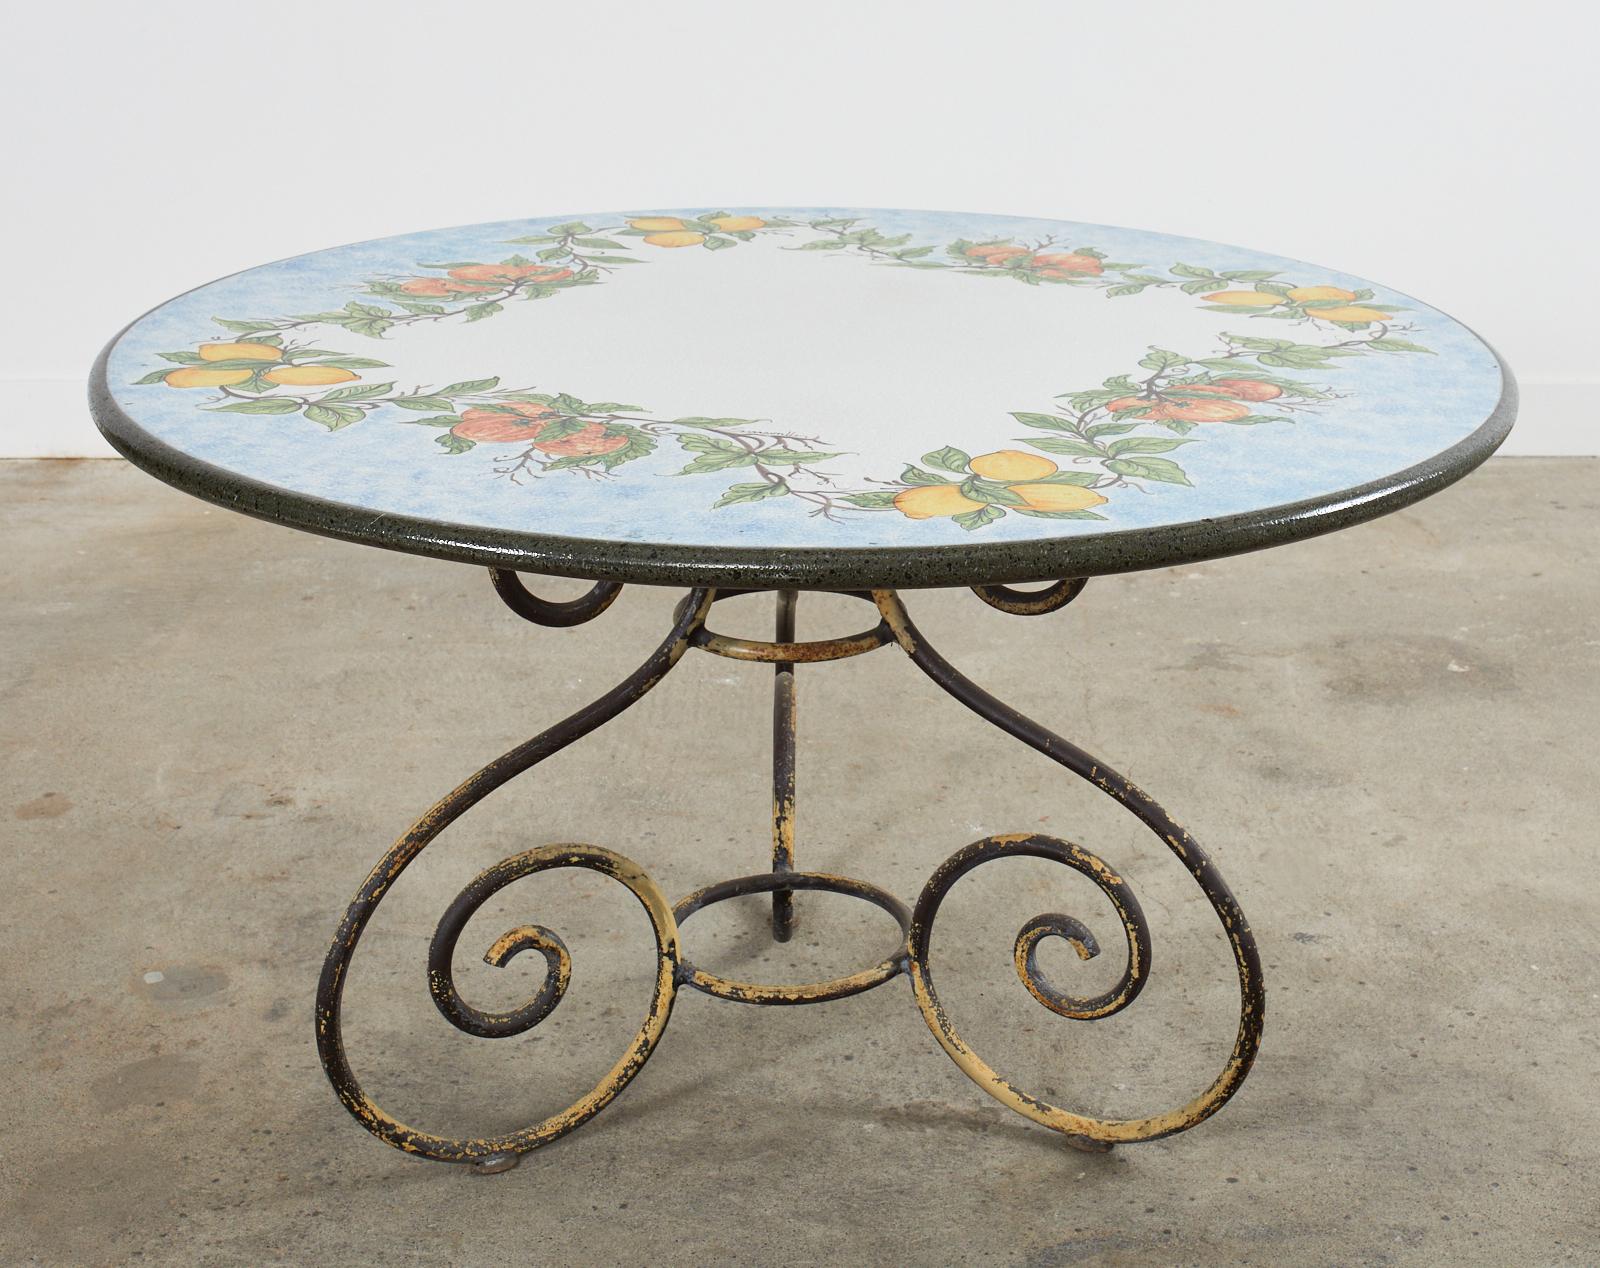 Italian Amalfi Style Glazed Stone and Iron Painted Garden Table For Sale 3